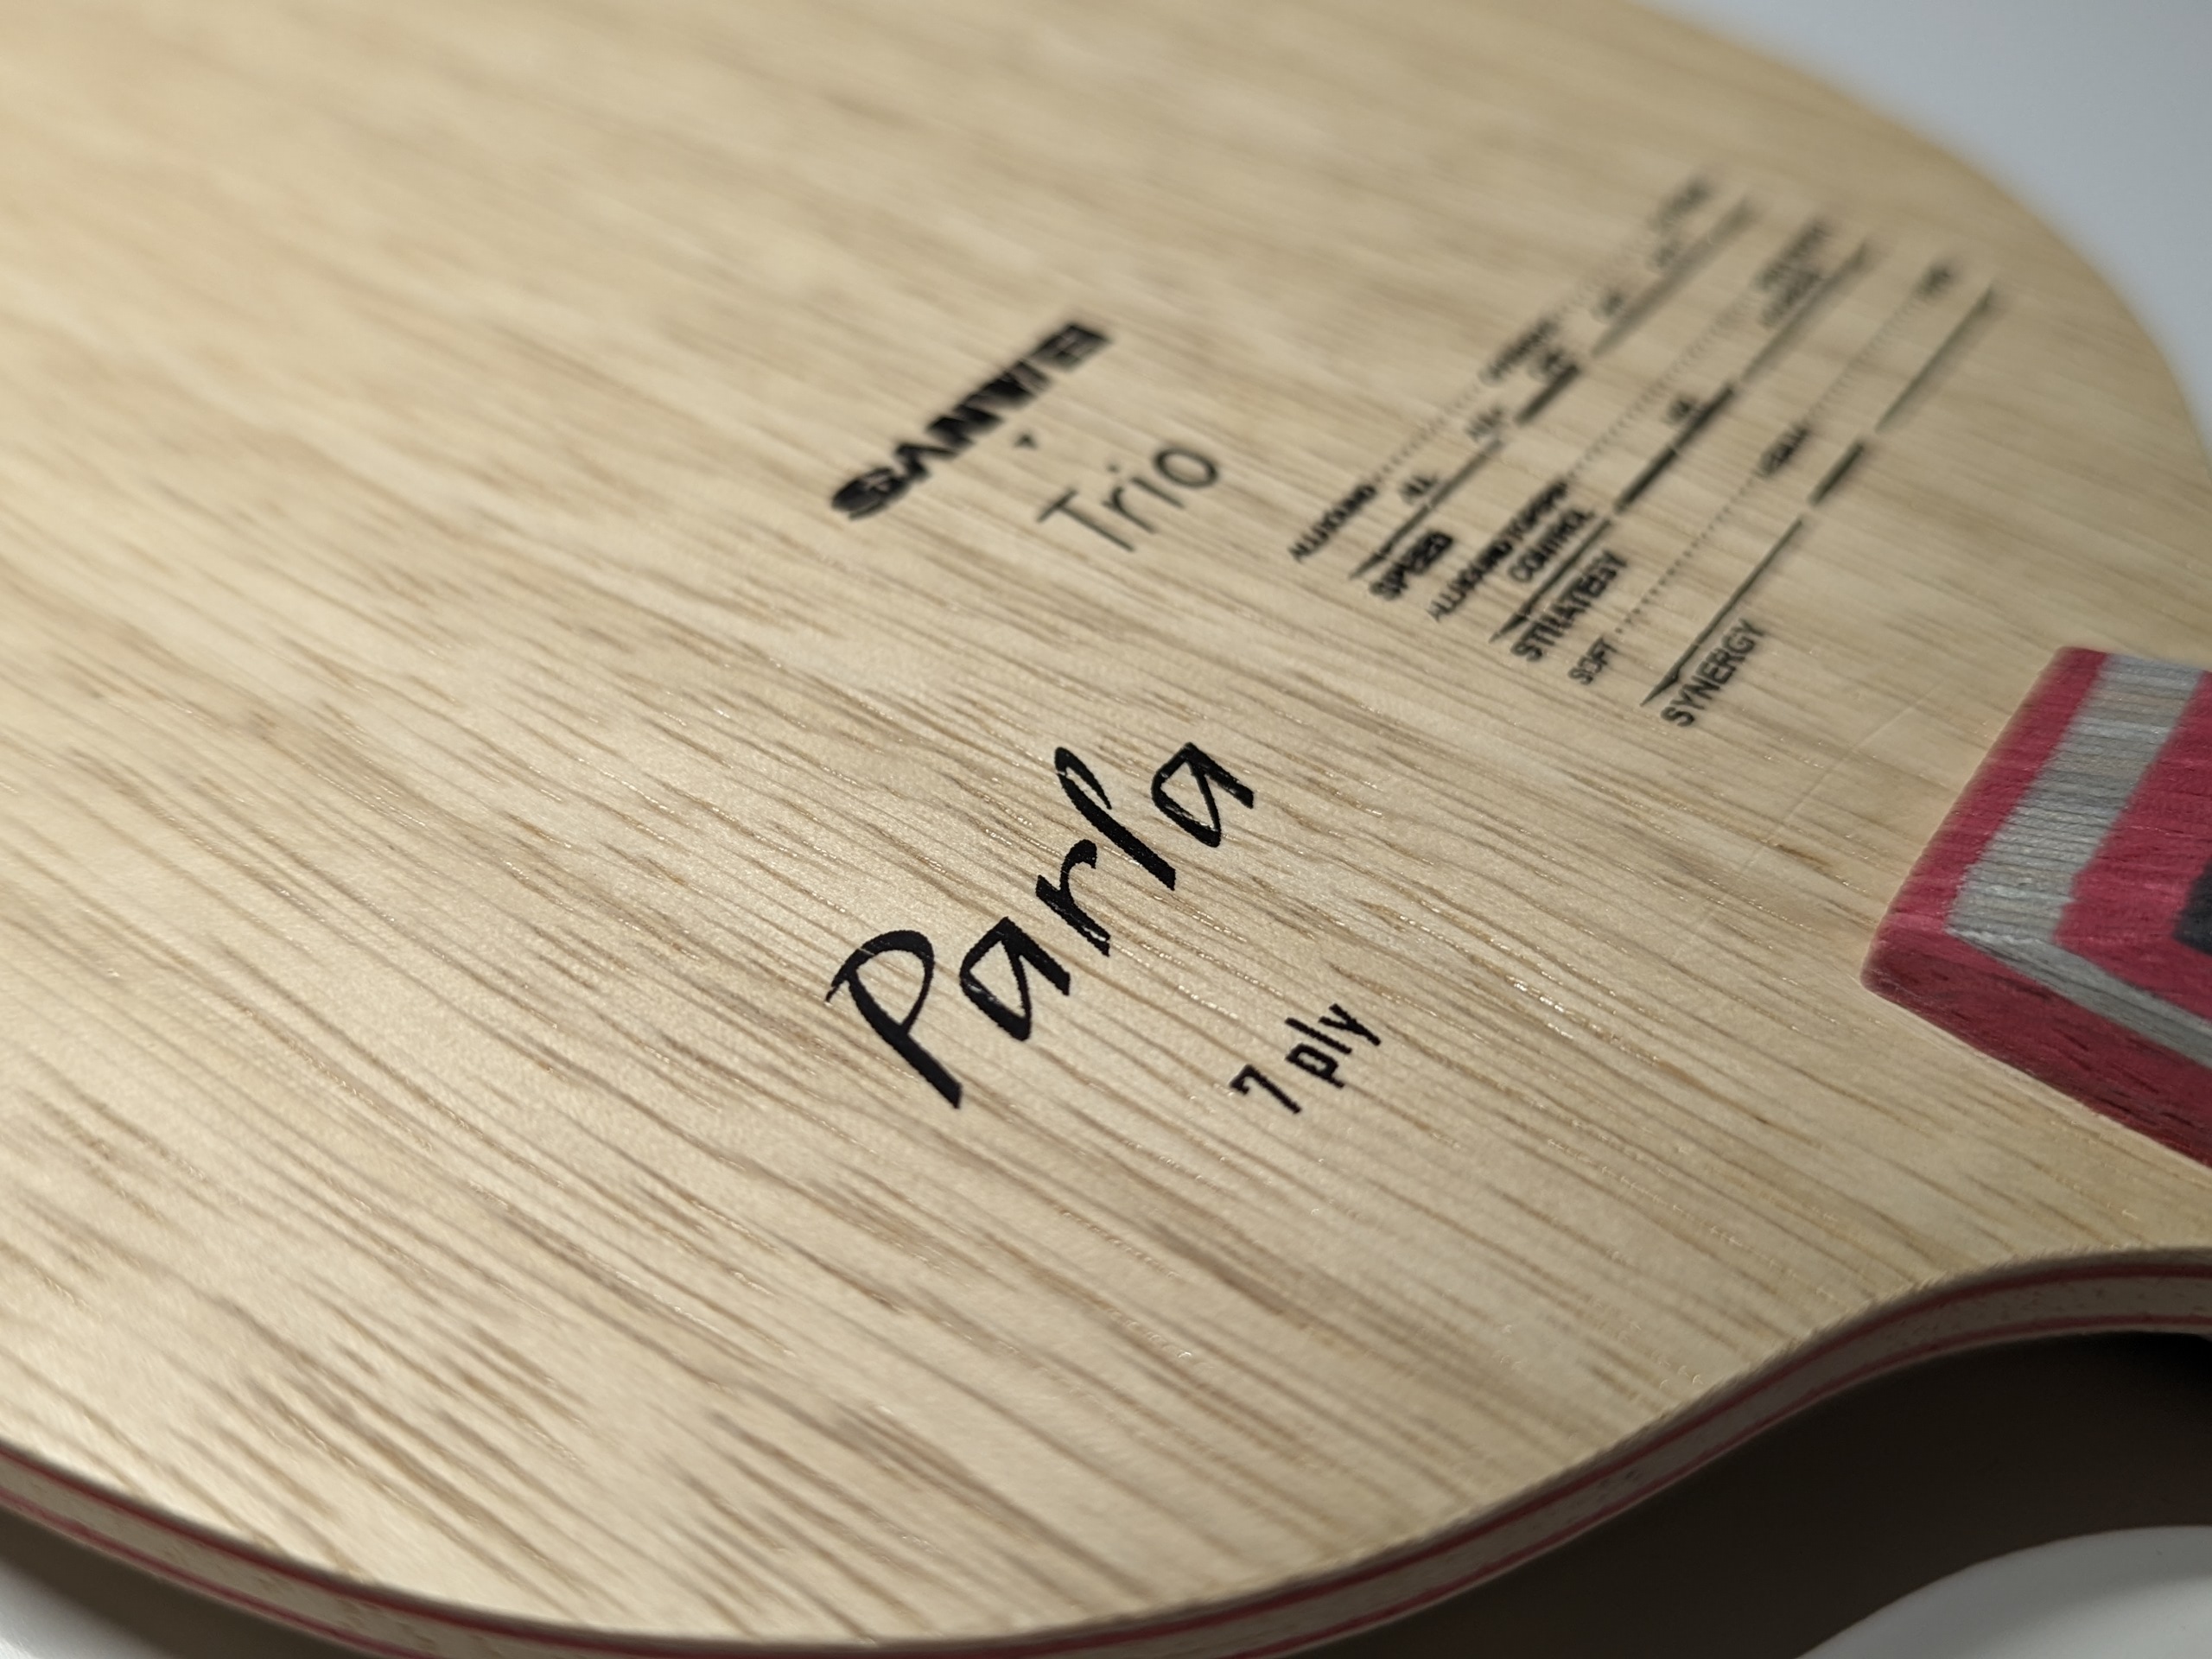 Printing on the front of the Sanwei Parla table tennis blade showing the name and technical details